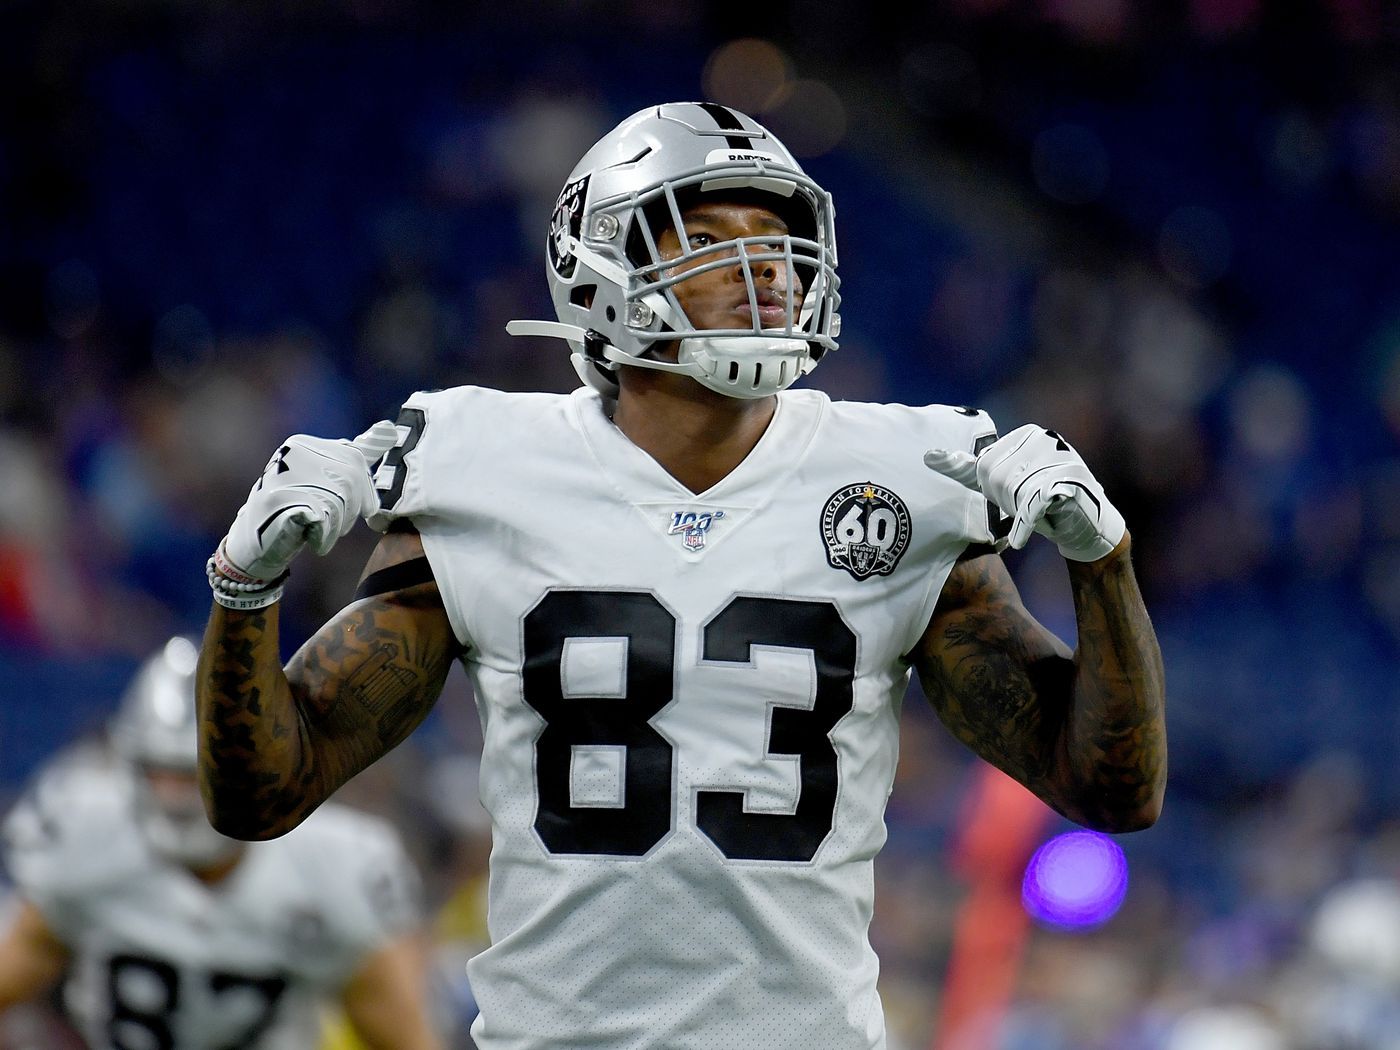 Raiders Packers Q&A: Darren Waller Emerges As Star Tight End Packing Company